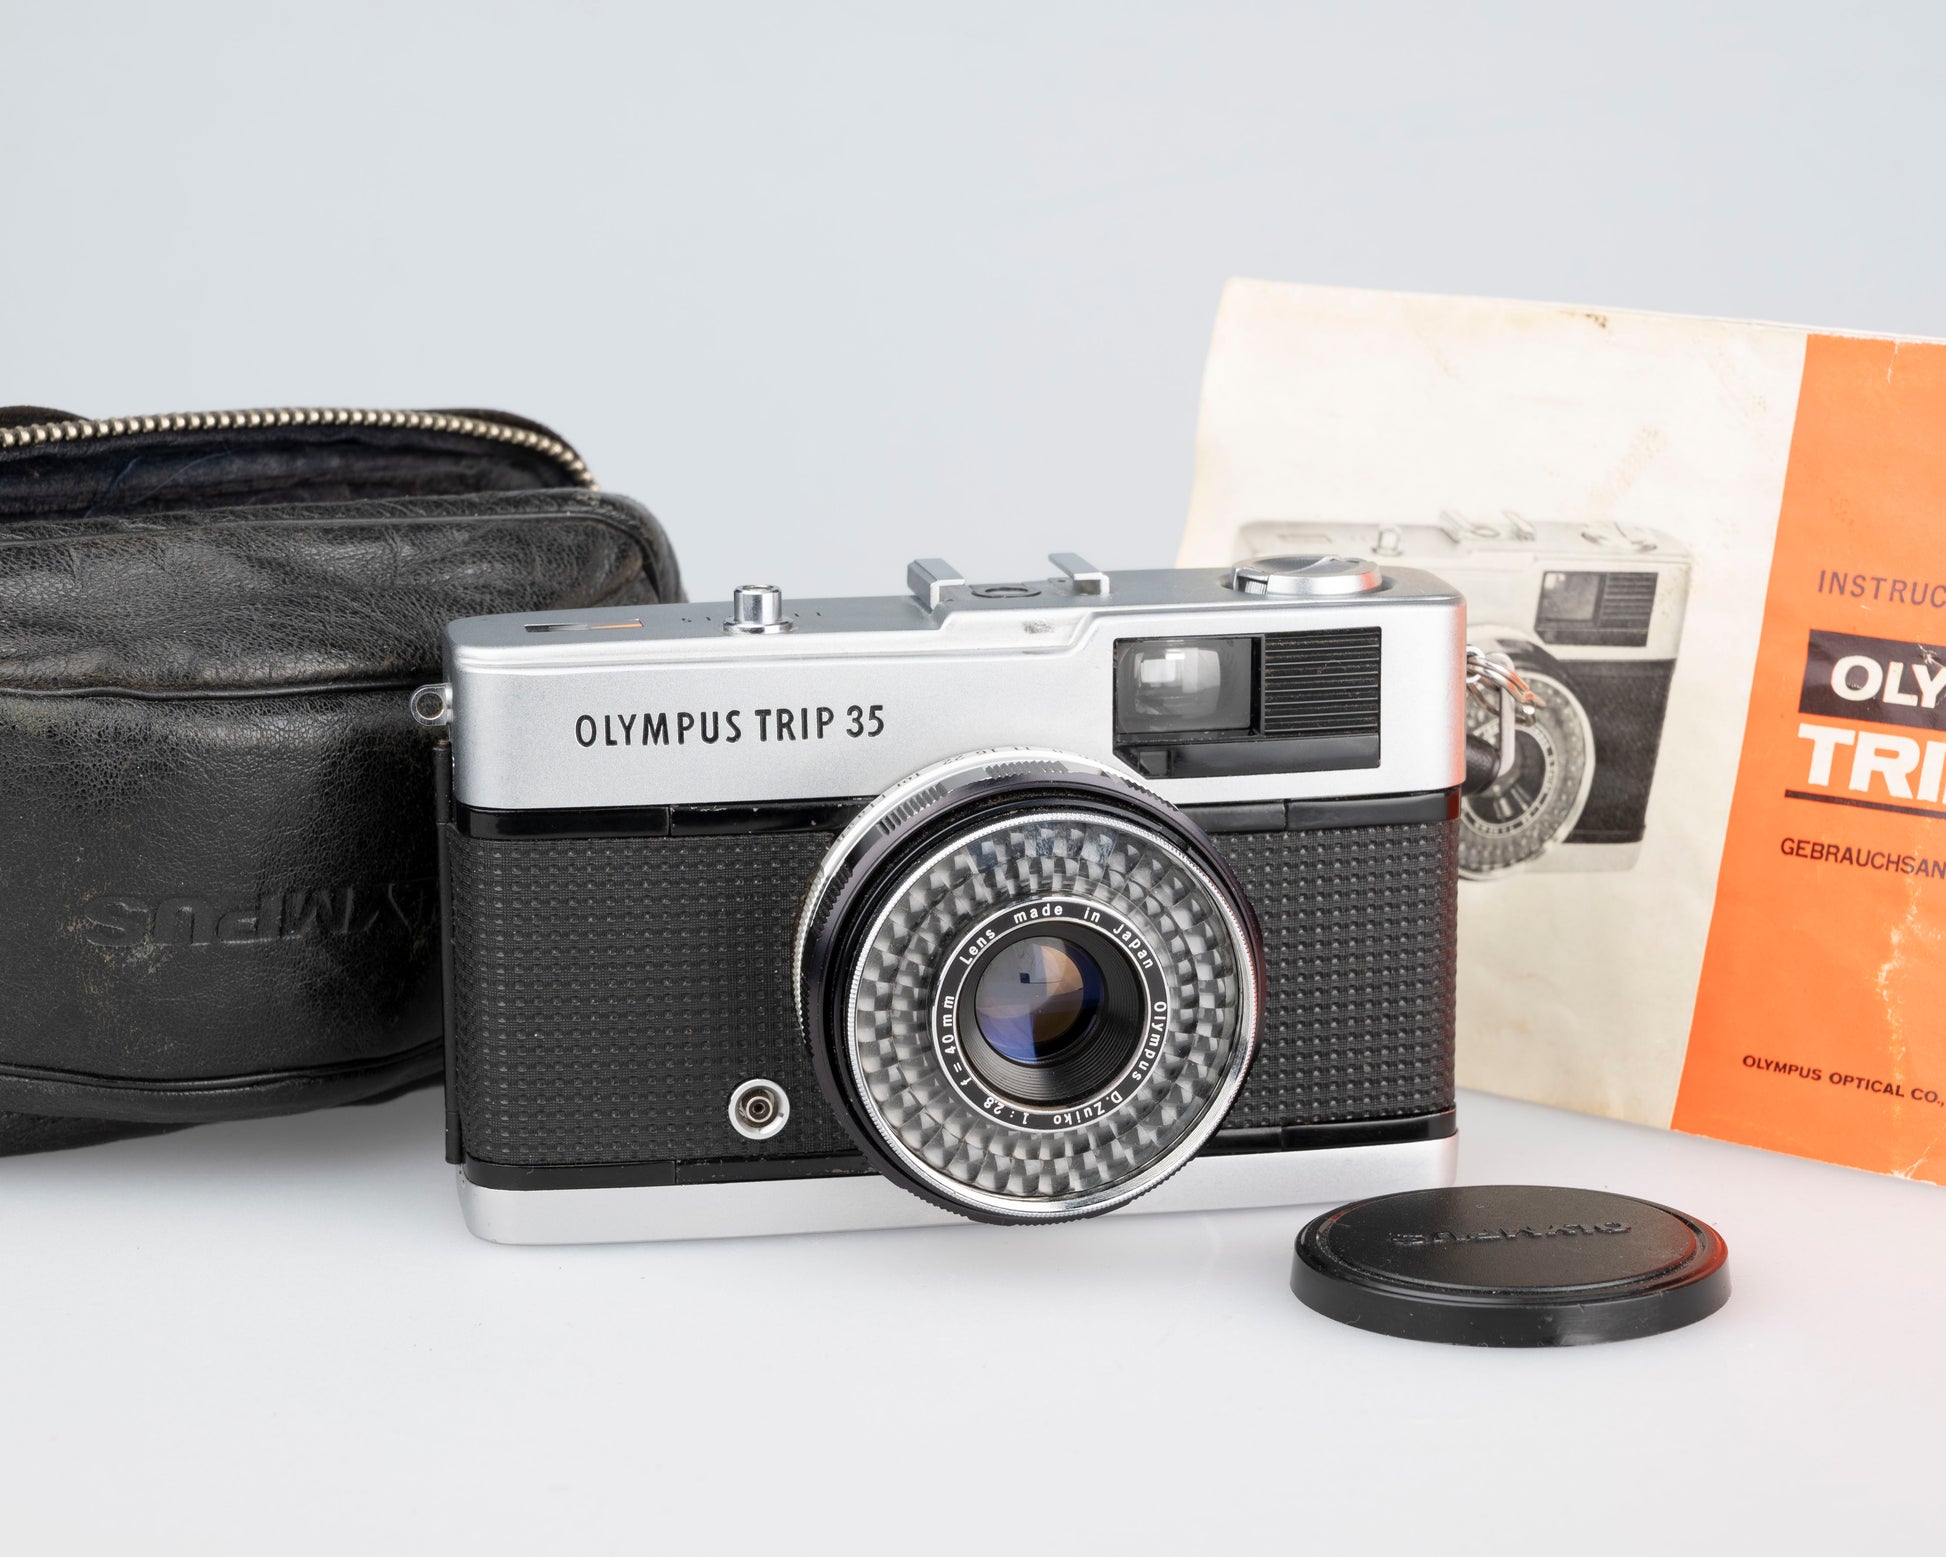 This is an Olympus Trip 35 with its original leather case and user manual